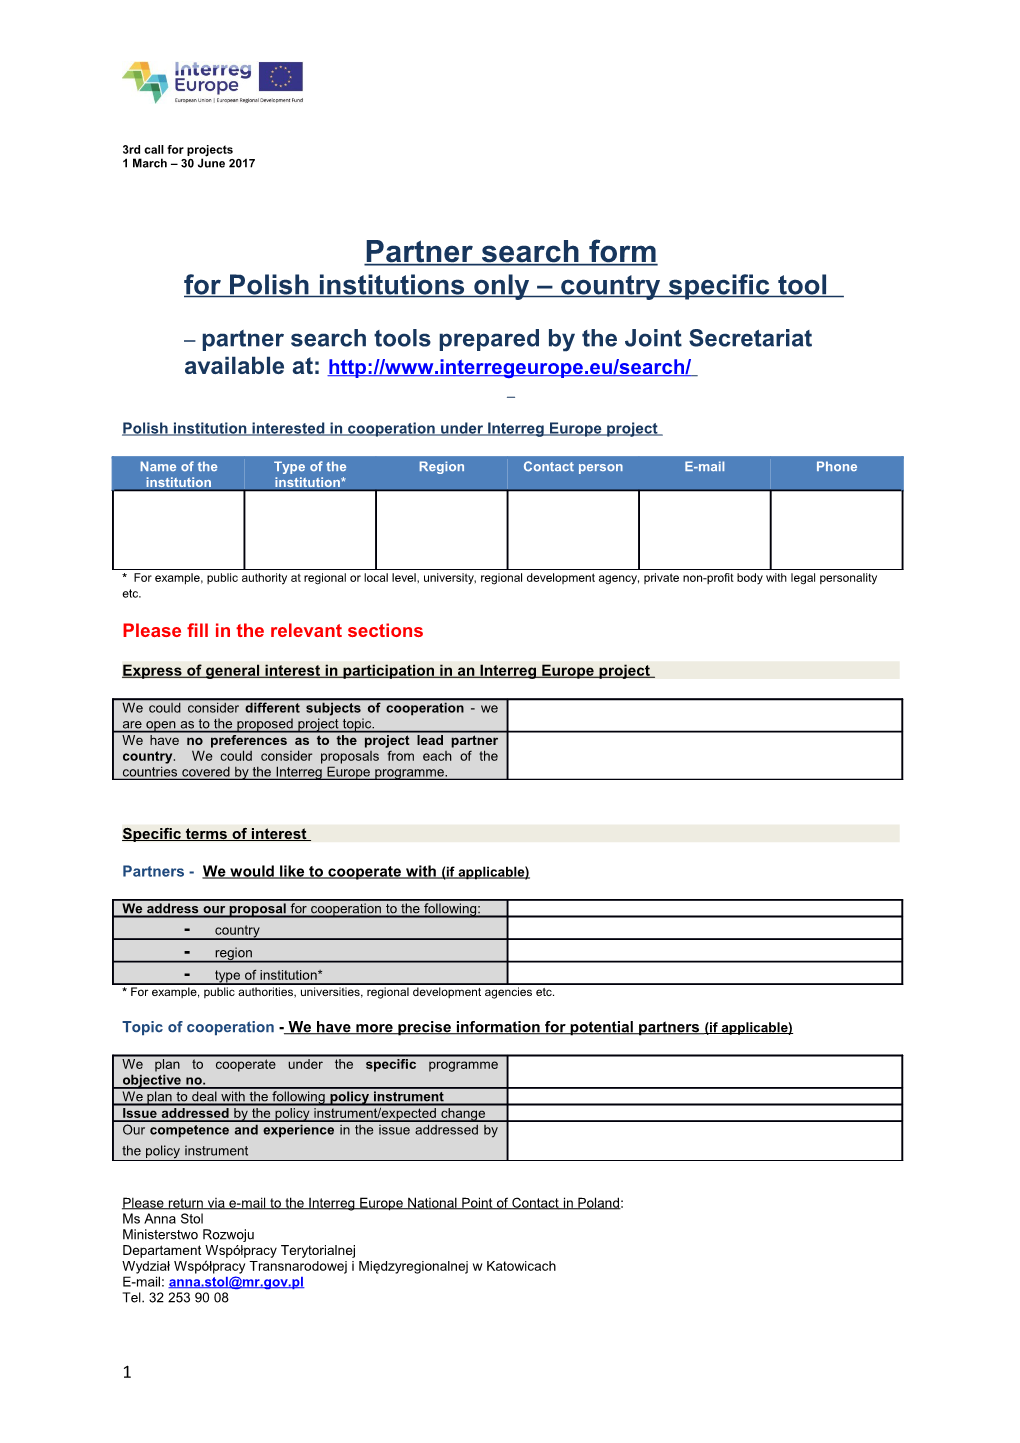 Partner Search Form s1